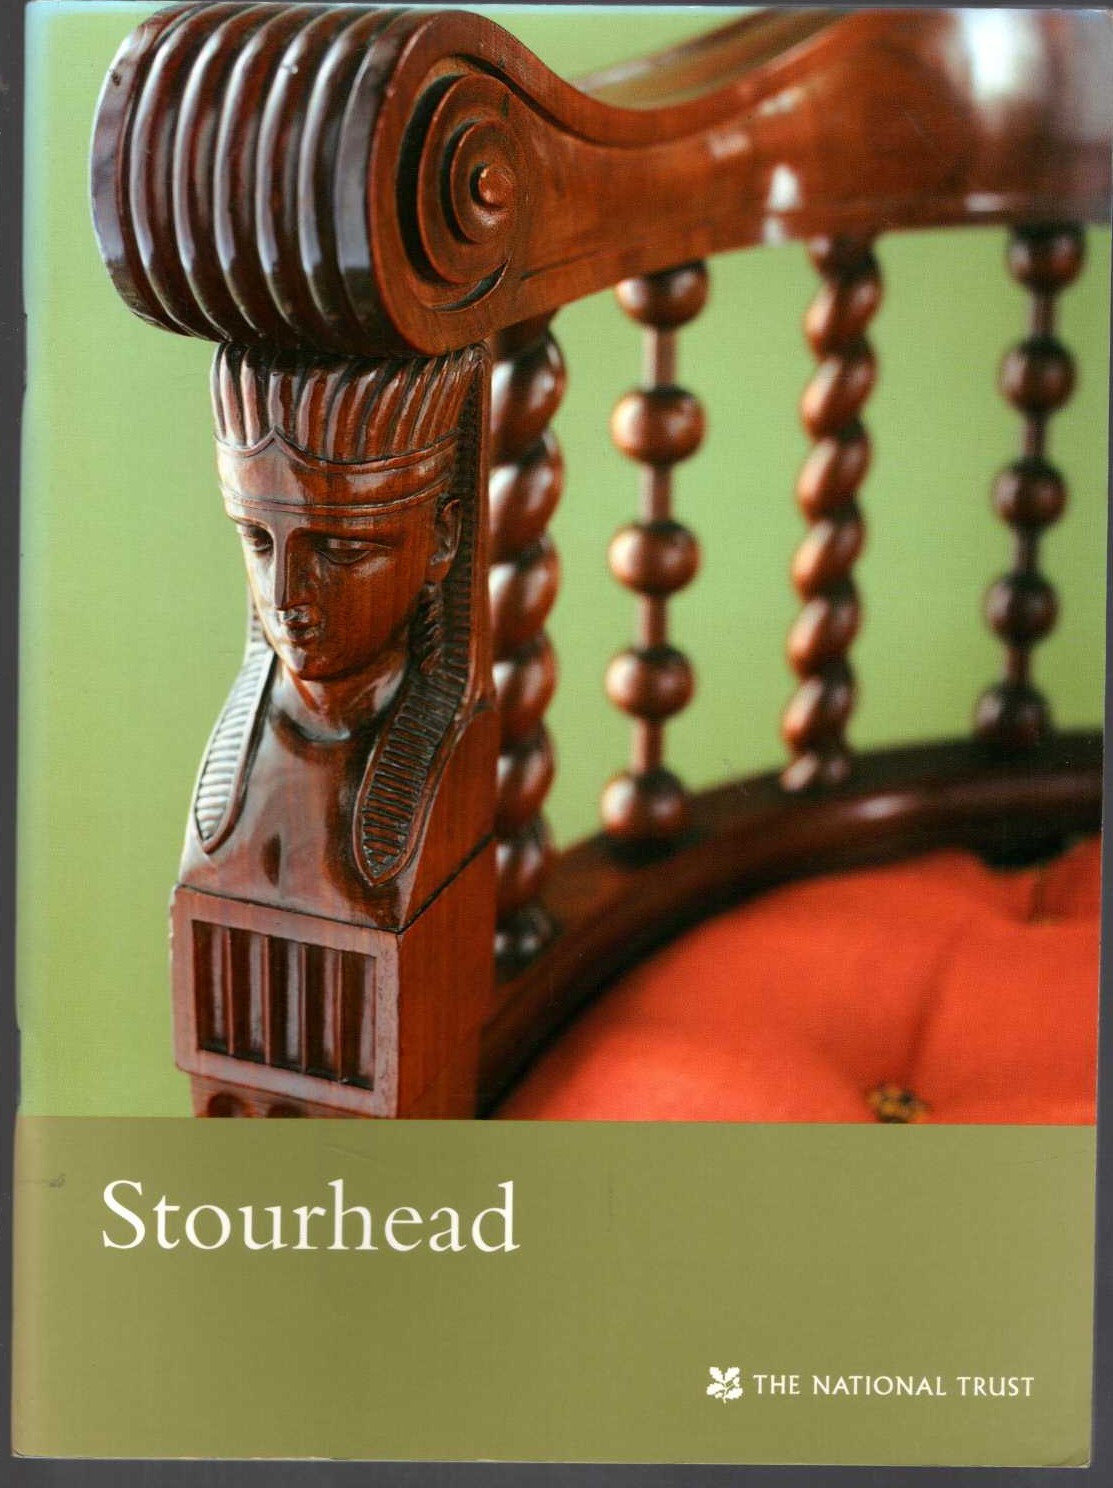 \ STOURHEAD by The National Trust front book cover image